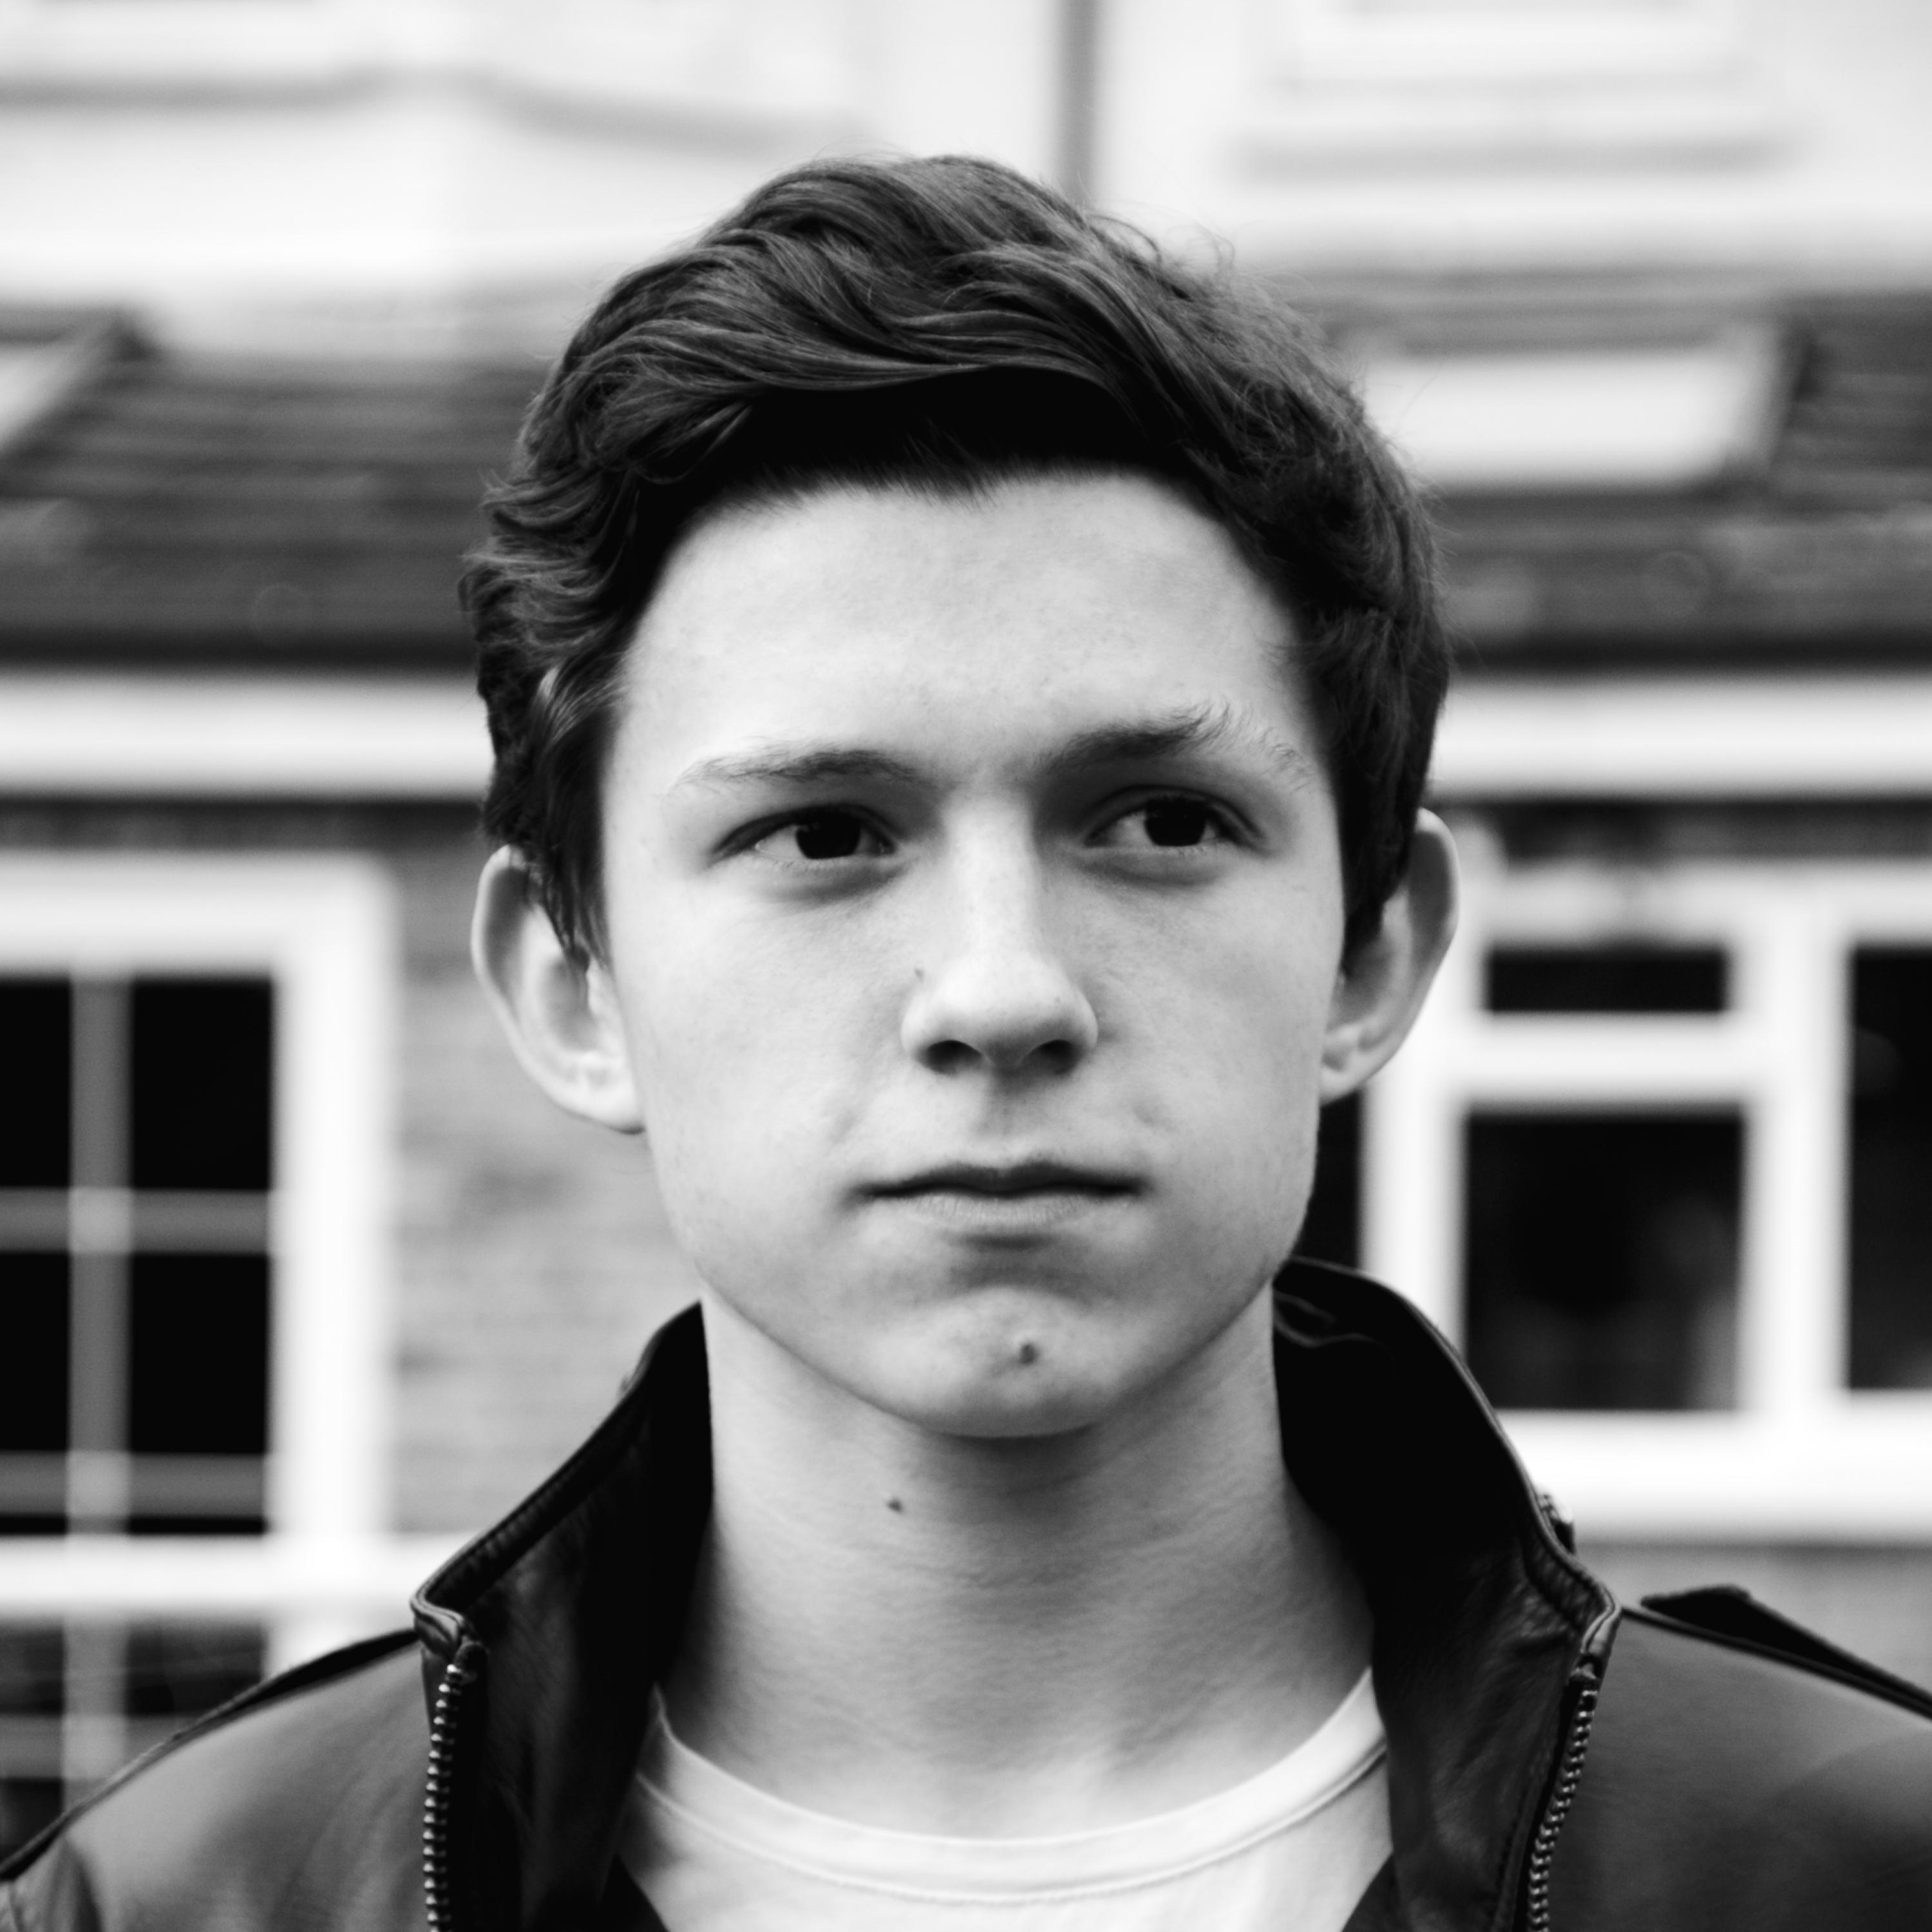 Tom Holland HD Wallpapers Free Download in High Quality and Resolution